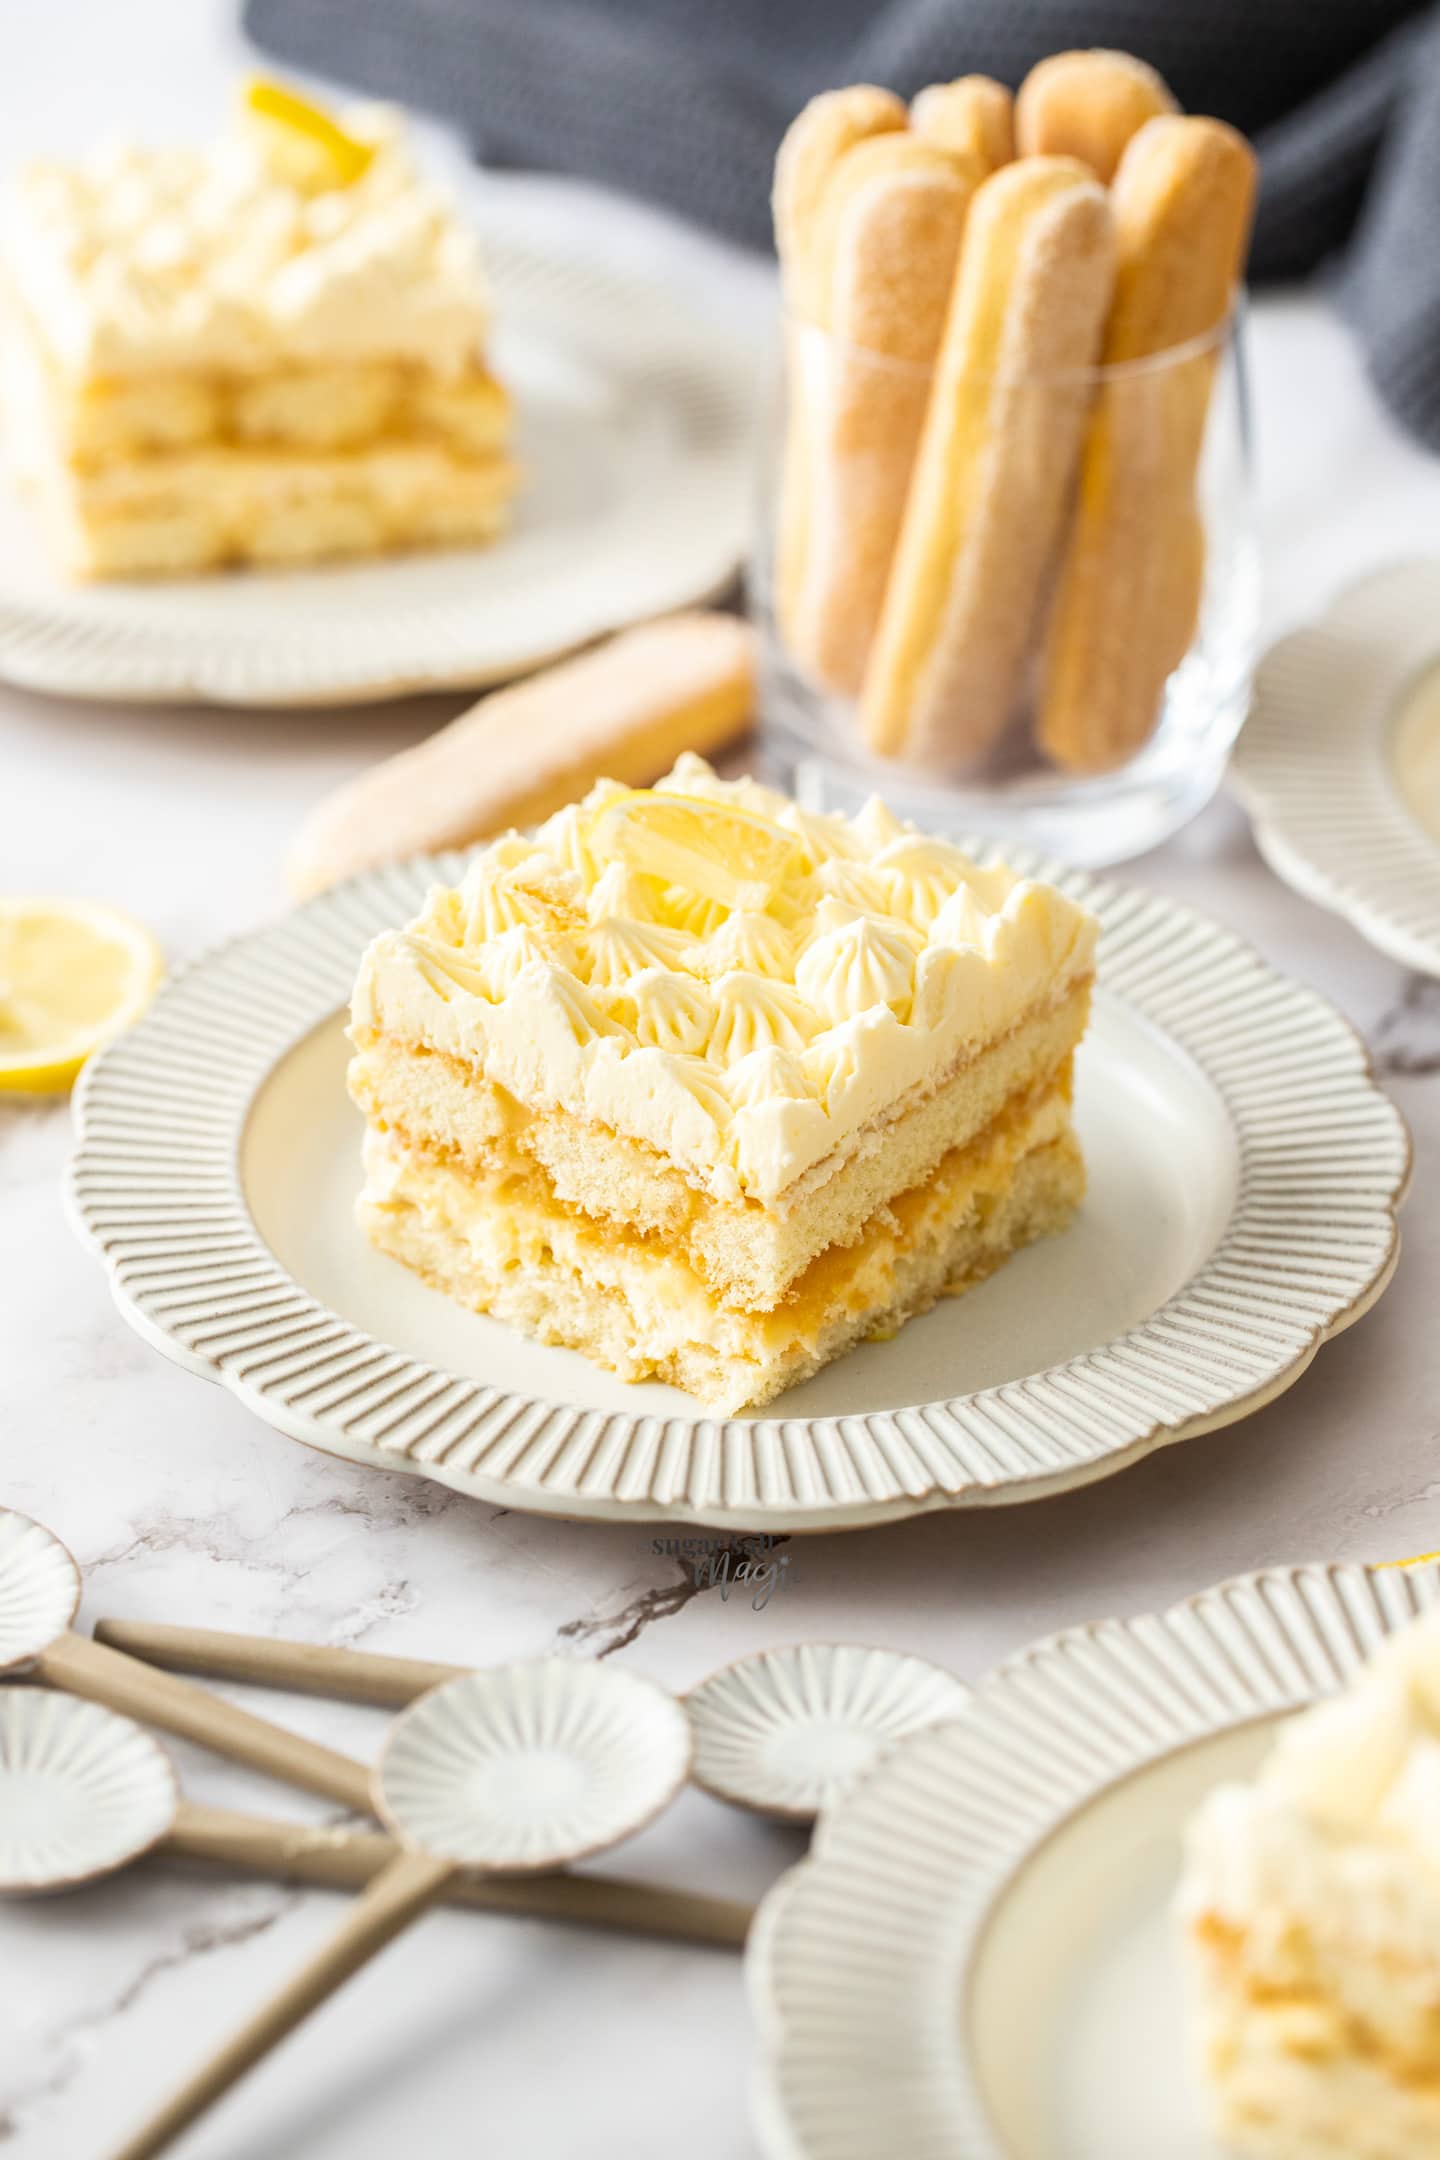 A square slice of lemon tiramisu on a small plate with a cup of lady fingers the background.